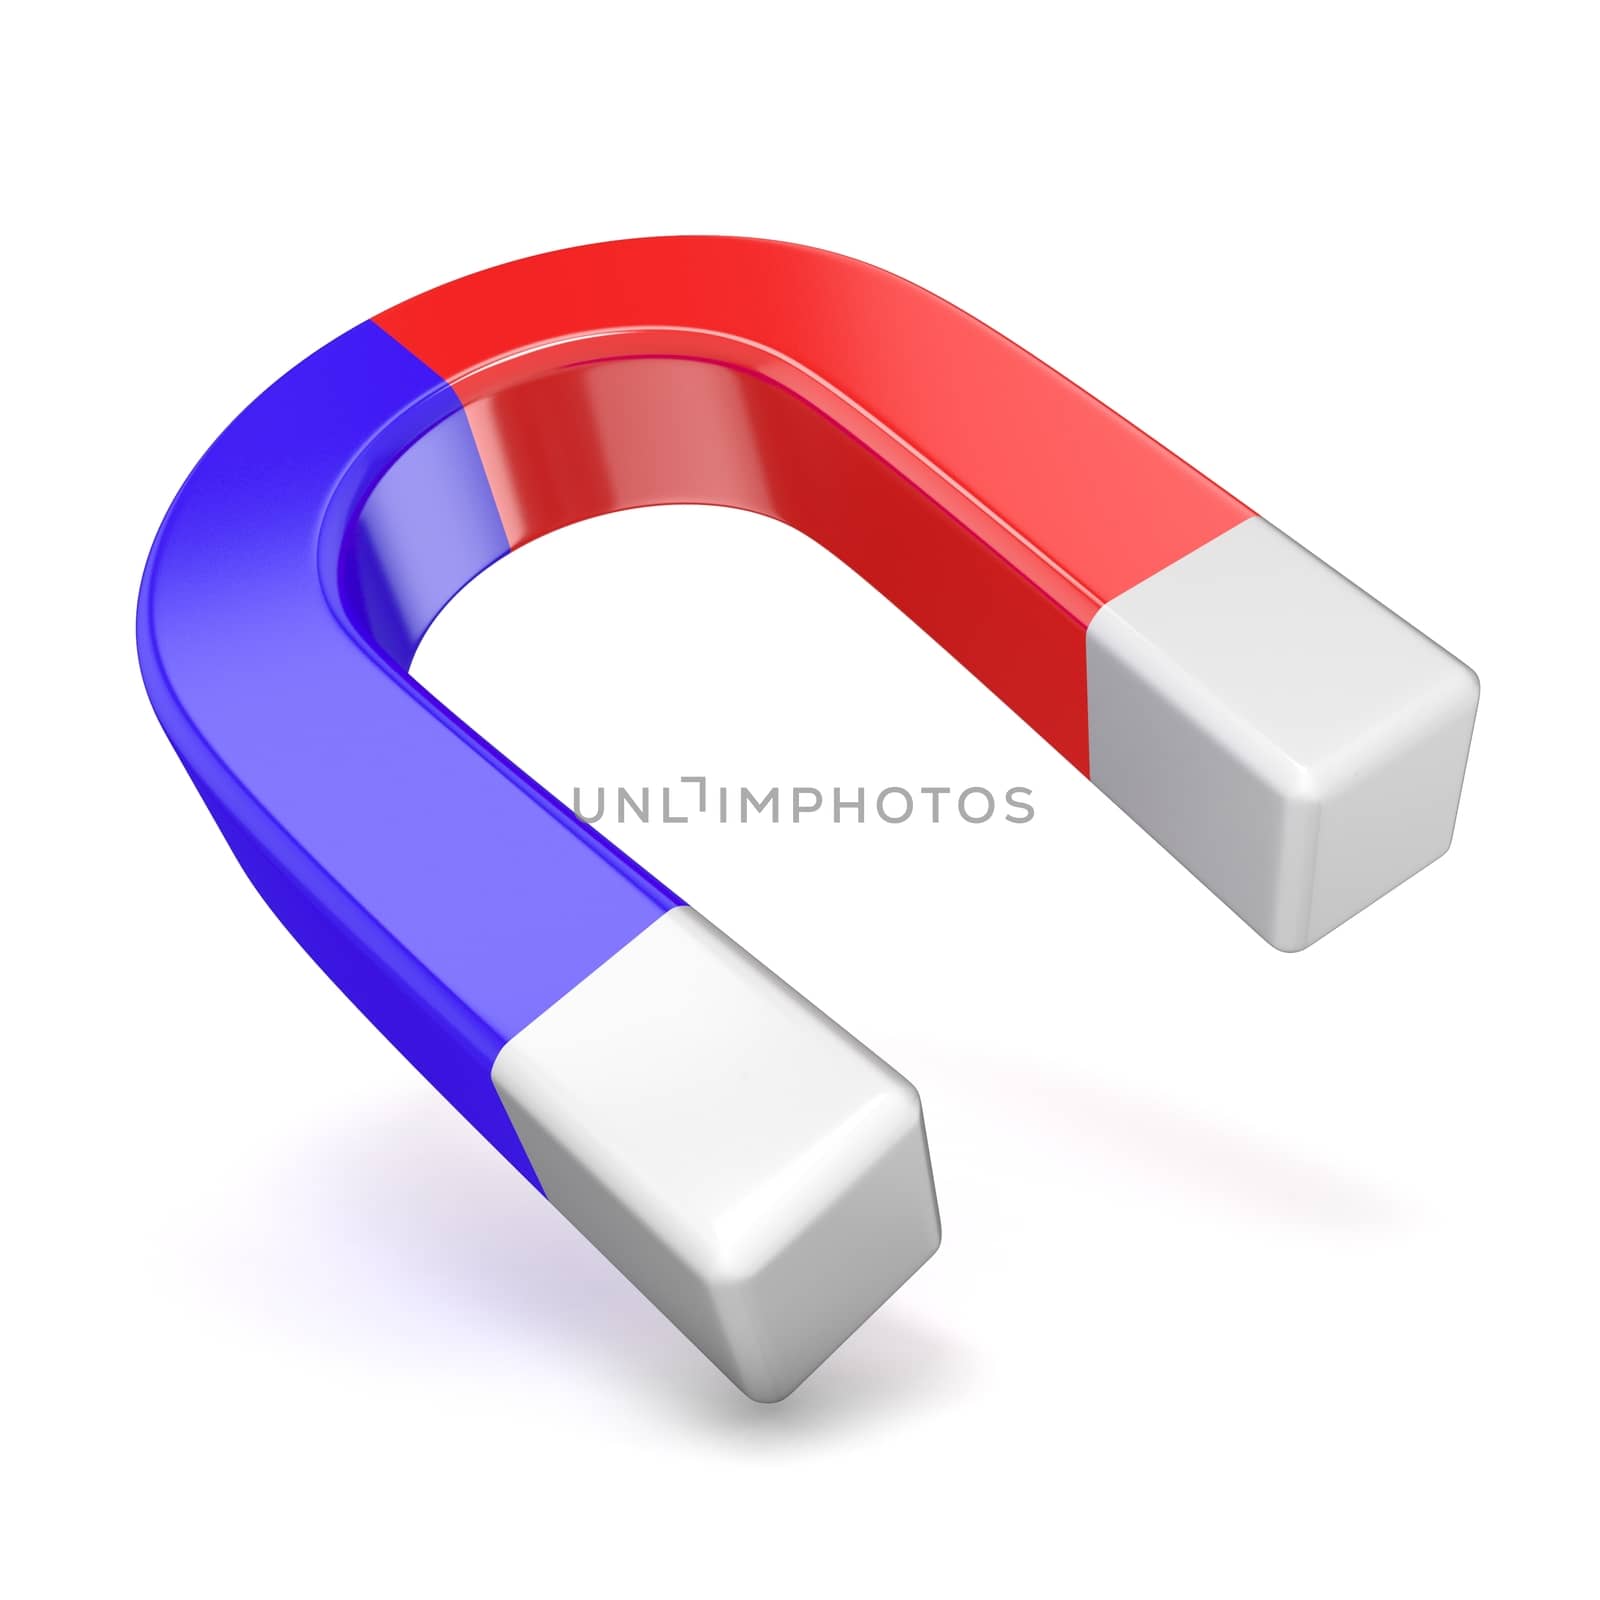 Red and blue horseshoe magnet, side view 3D render illustration isolated on white background